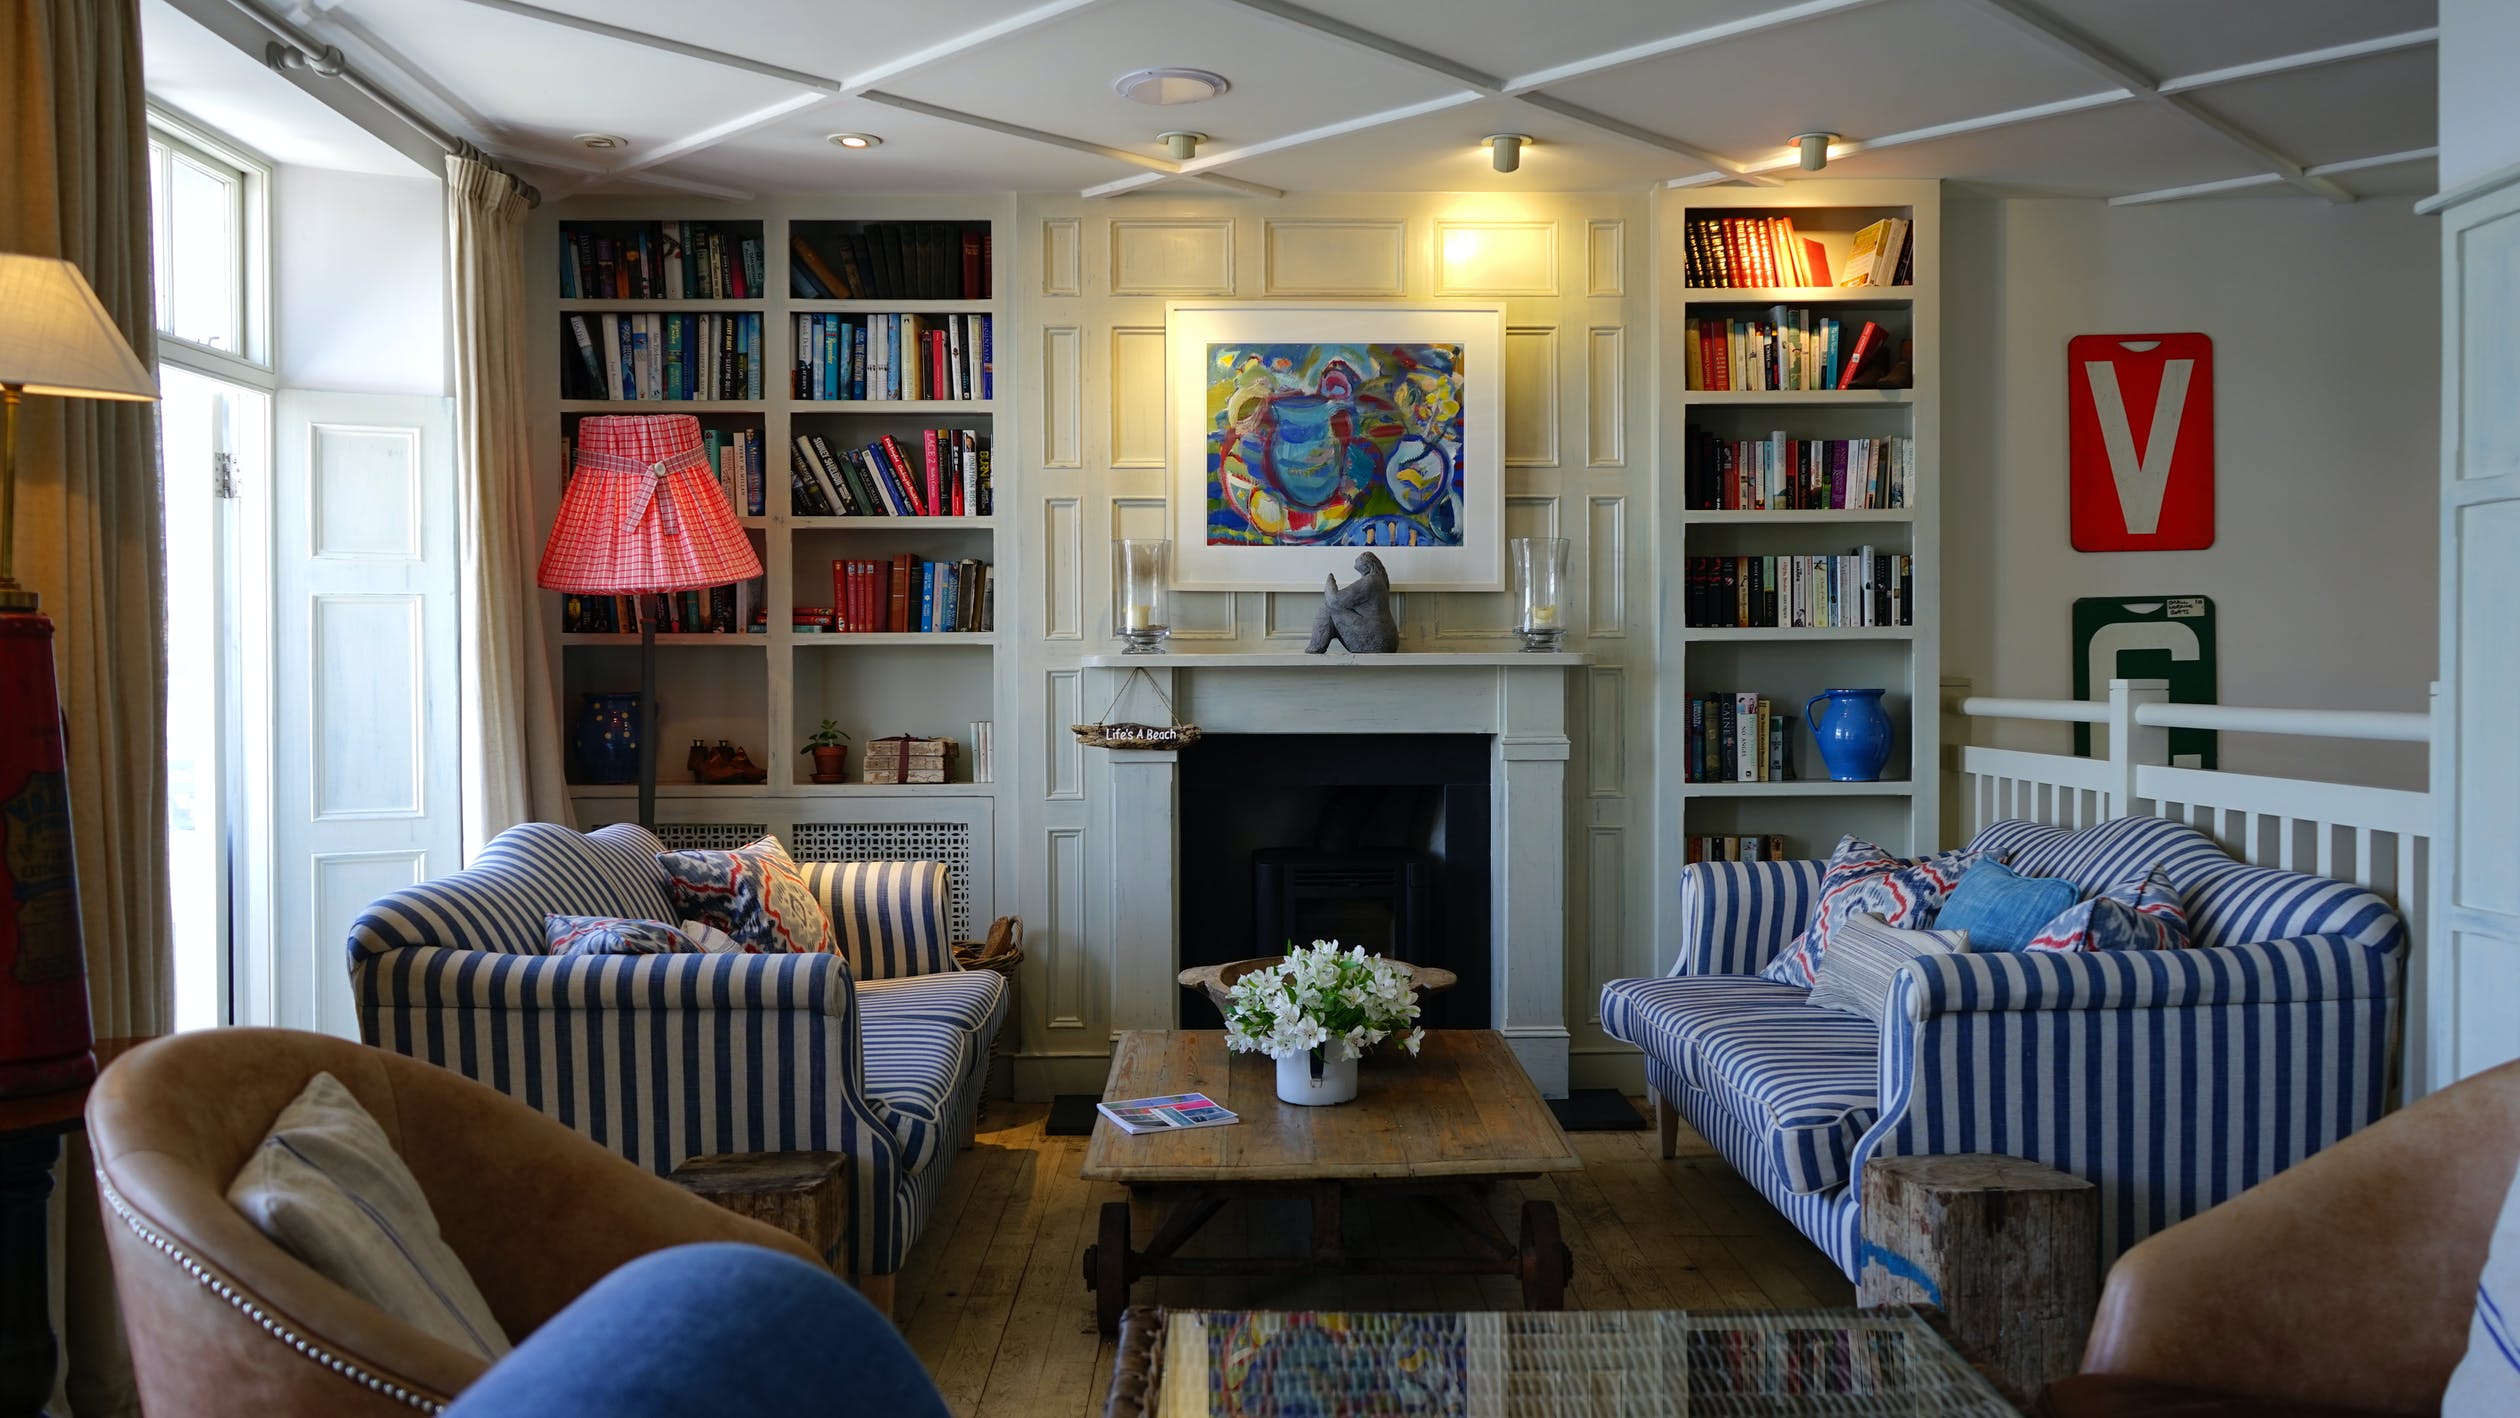 Bookshelves with sofas and a lamp